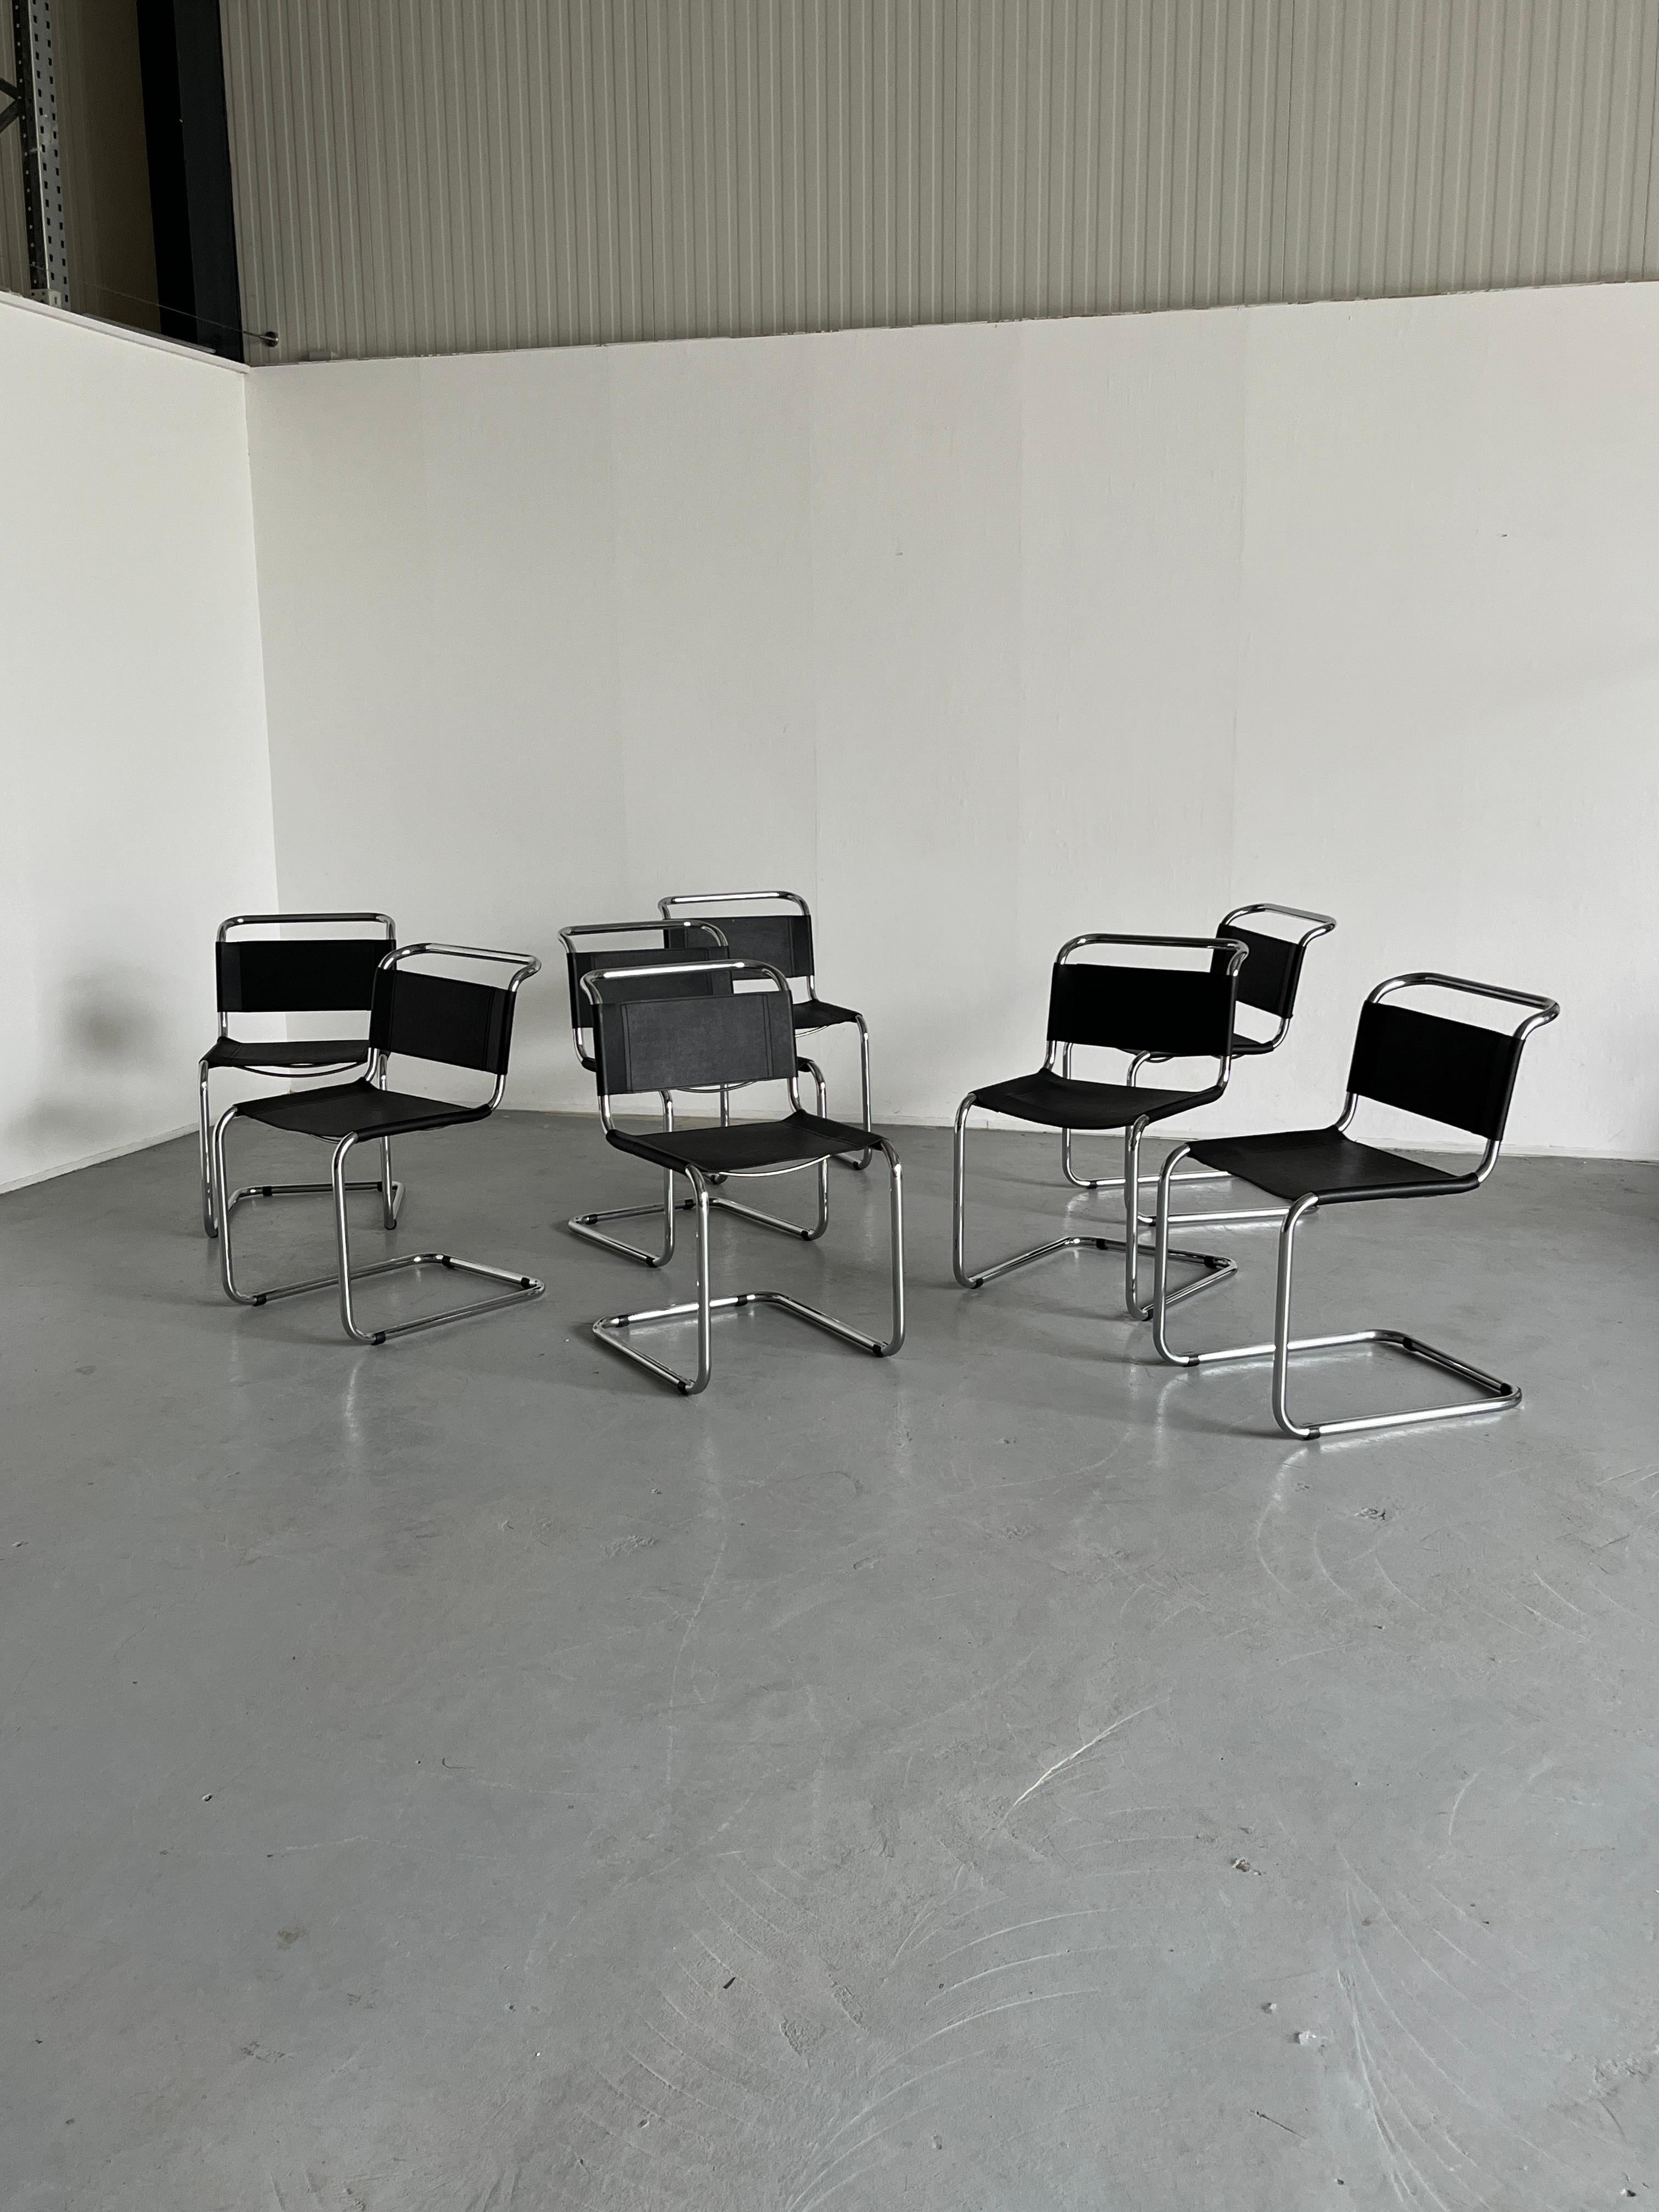 Mart Stam S33 Design Cantilever Tubular Steel and Faux Leather Chairs, 1970s In Good Condition For Sale In Zagreb, HR